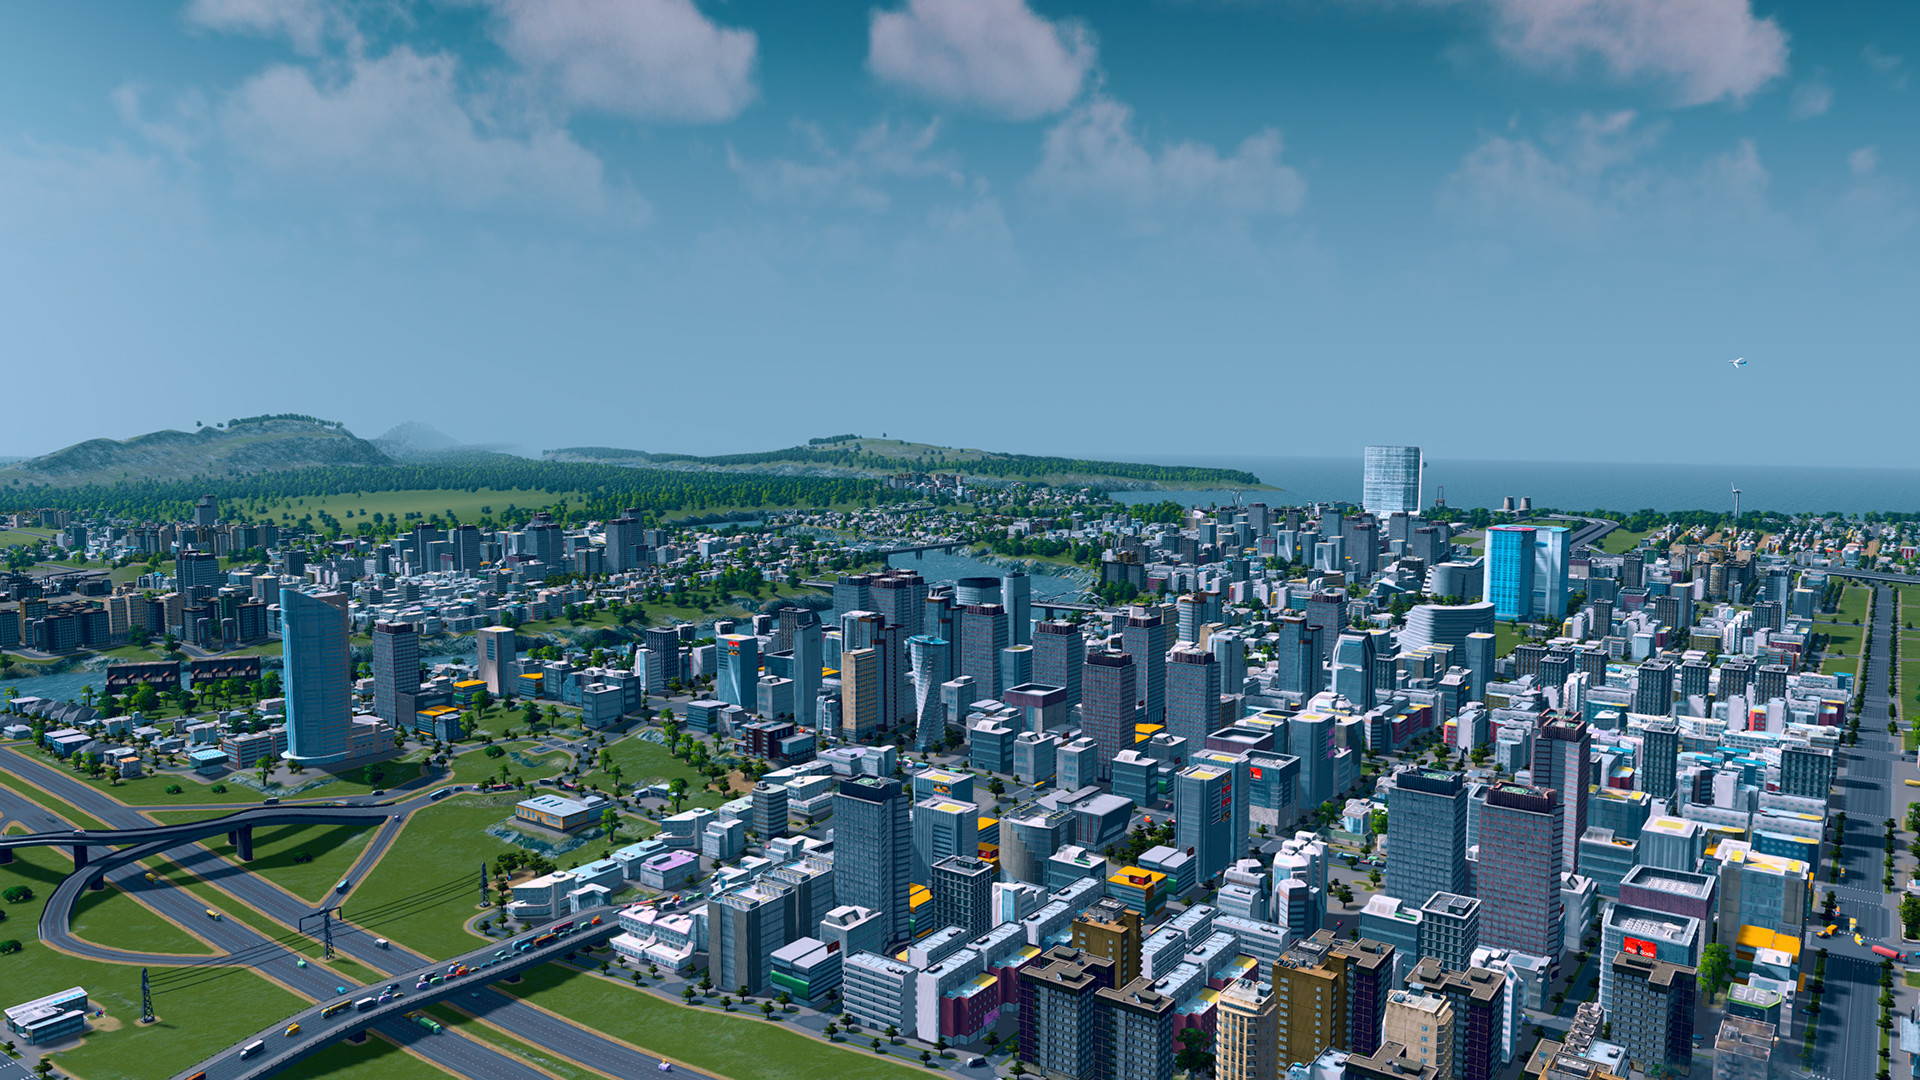 Cities Skylines System Requirements - Can I Run It? - PCGameBenchmark